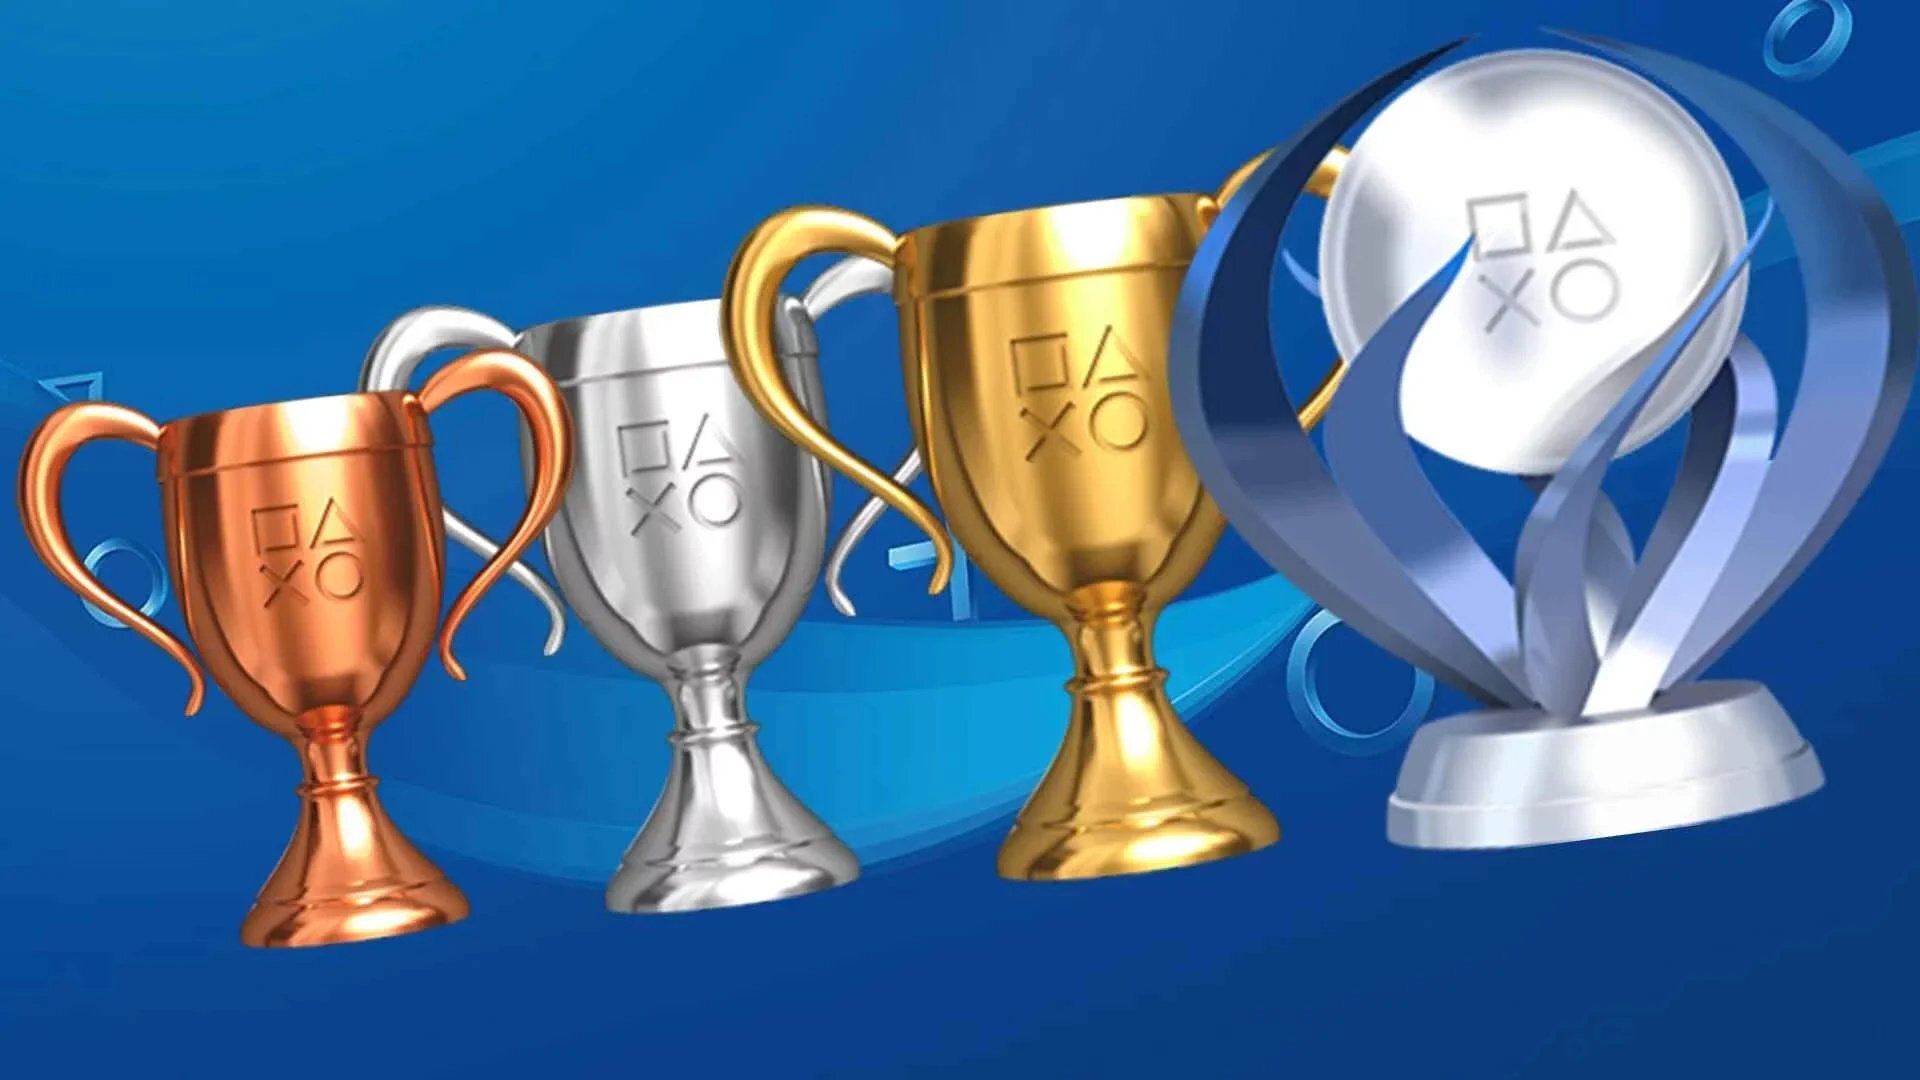 PS4 and PS5 Trophy Guide: How to Get All Trophies